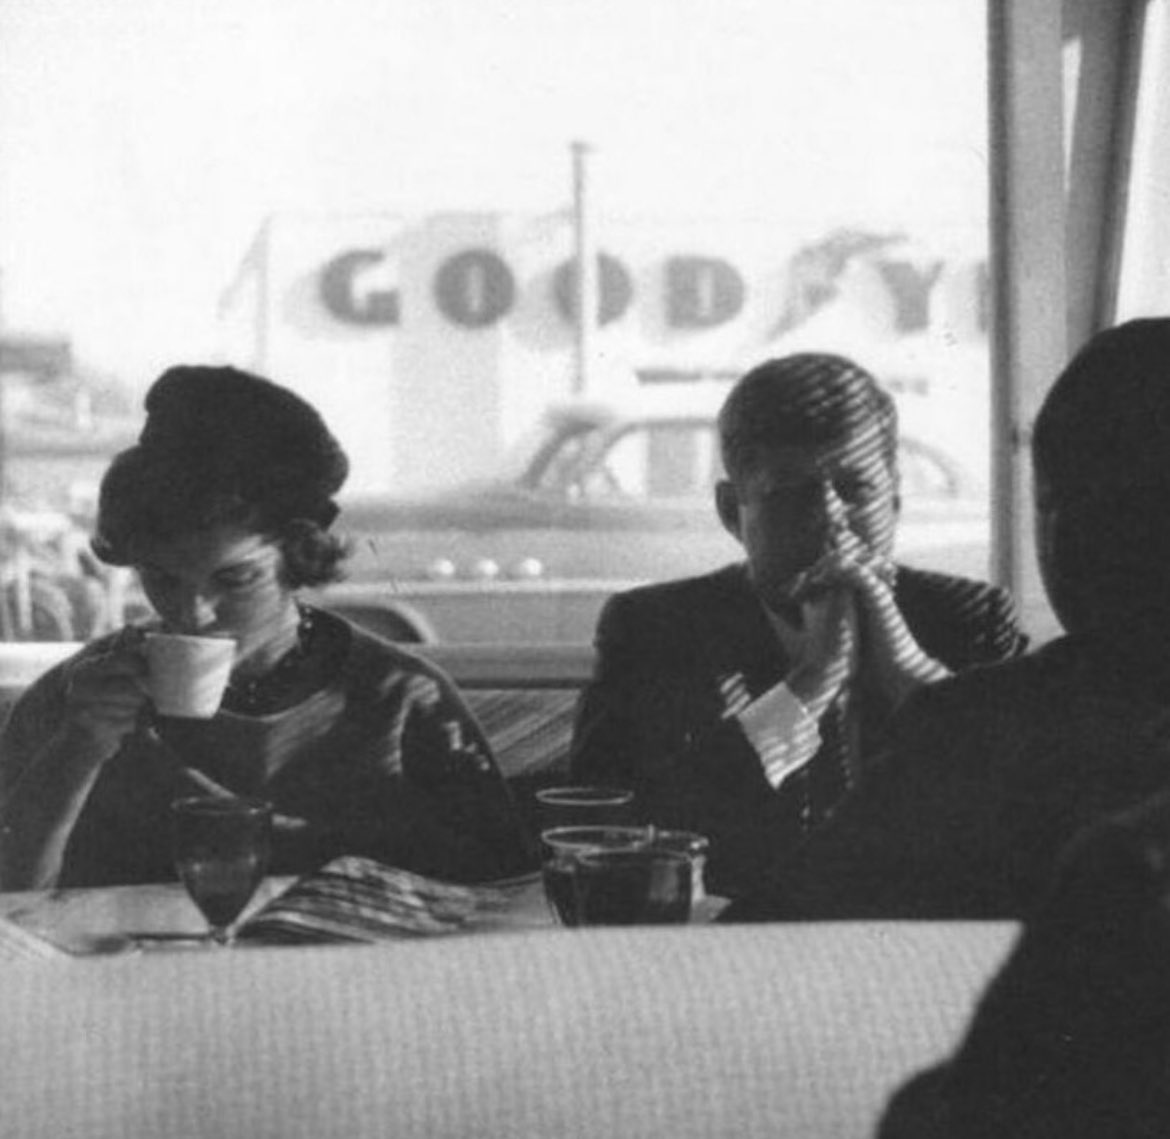 JFK and Jackie at a diner in Oregon, 1959. As Kennedy sat in the diner, he was a senator at the time and still relatively unknown in most parts of the country. He hadn't even officially announced that he was running for president. However, during this photo, he was on an…